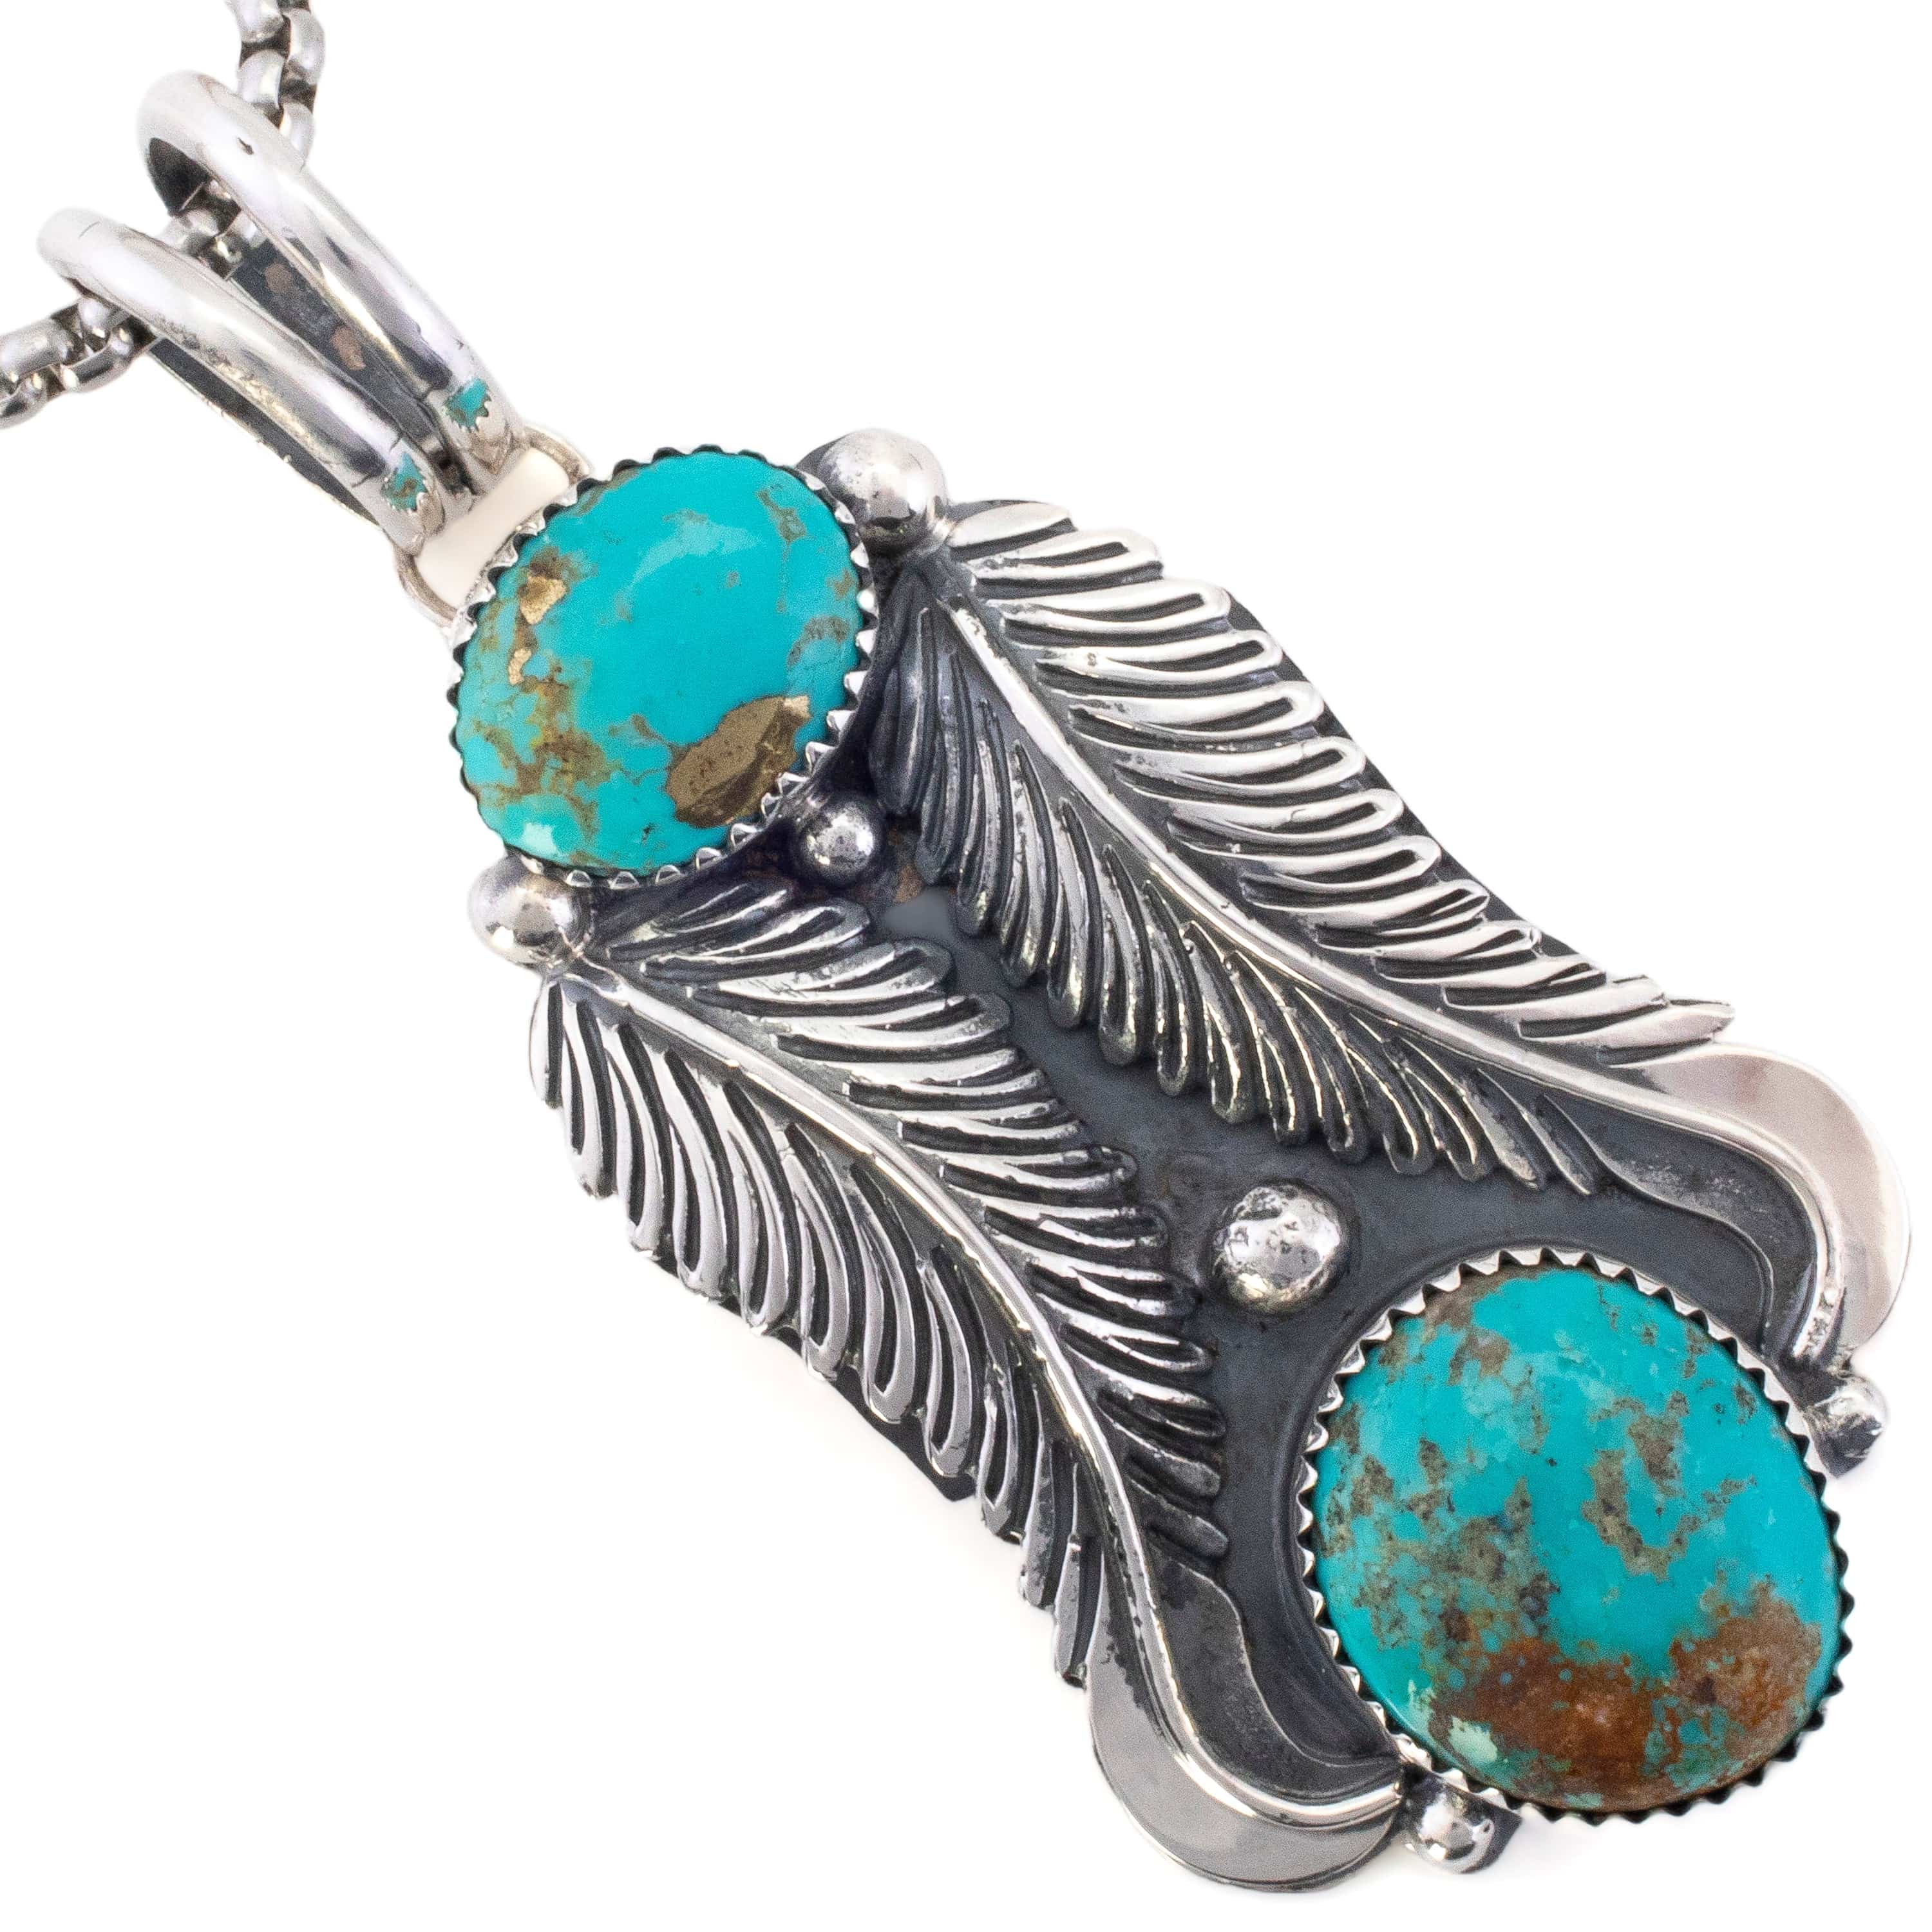 Kalifano Southwest Silver Jewelry Kingman Turquoise Feather USA Handmade 925 Sterling Silver Pendant NMN700.001